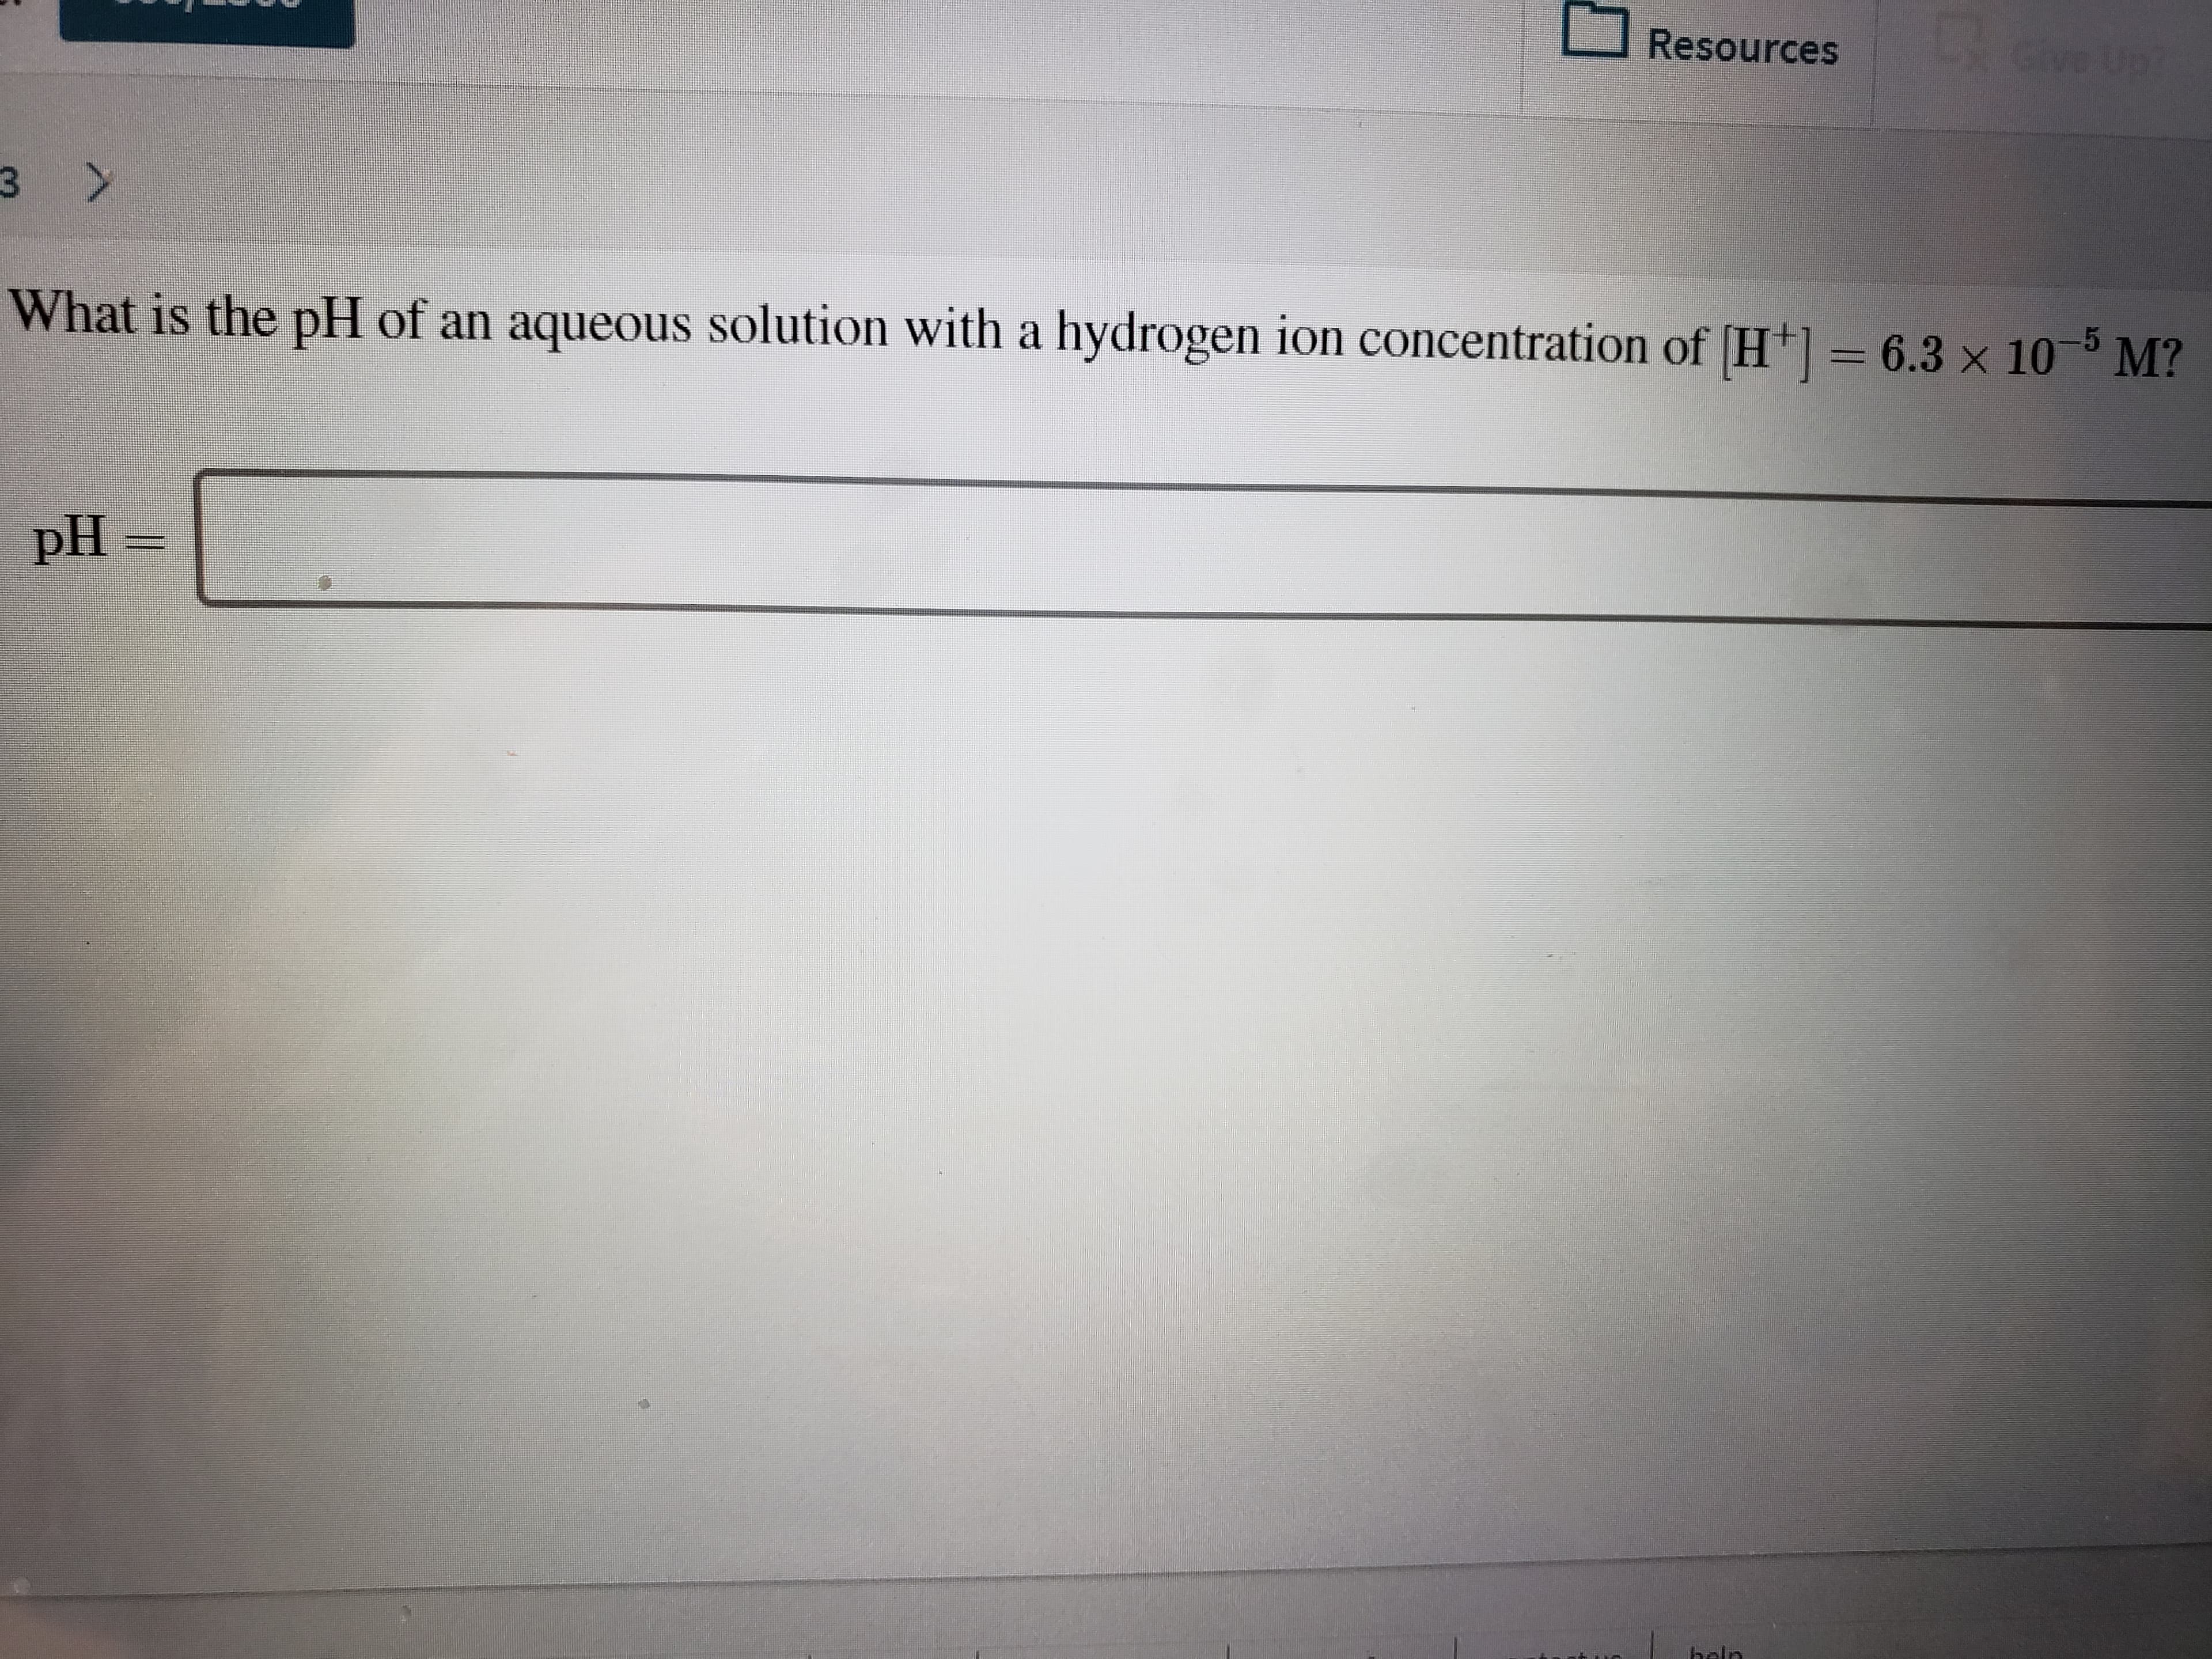 O Resources
Give Up
3 >
What is the pH of an aqueous solution with a hydrogen ion concentration of (H+] = 6.3 x 10
M?
pH
hele
